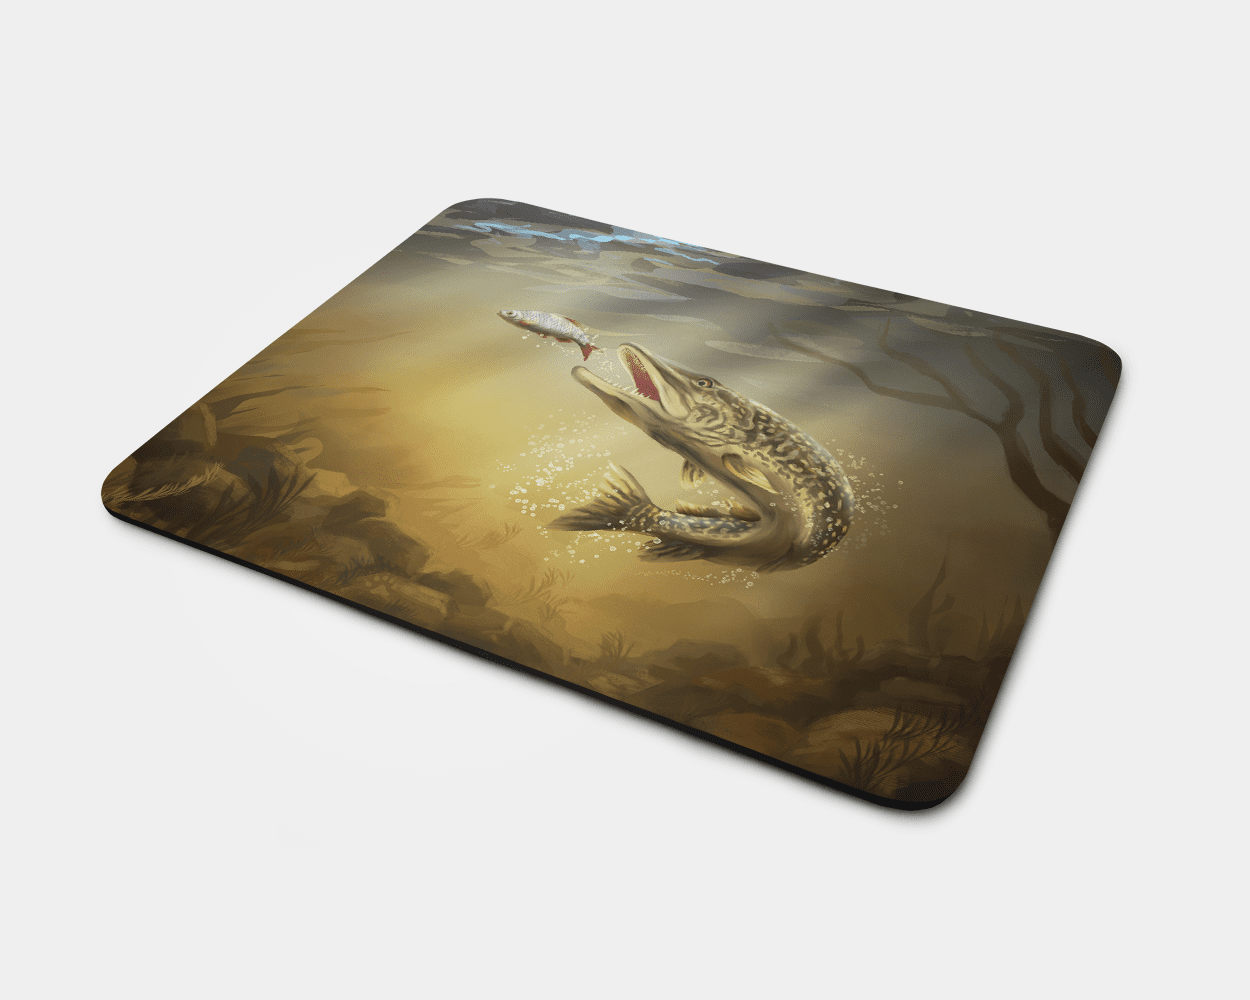 Country Images Personalised Fabric Custom Customised Mousemat Cheap Scotland UK Pike Fishing Fish Angler Angling Gift Gifts Ideas